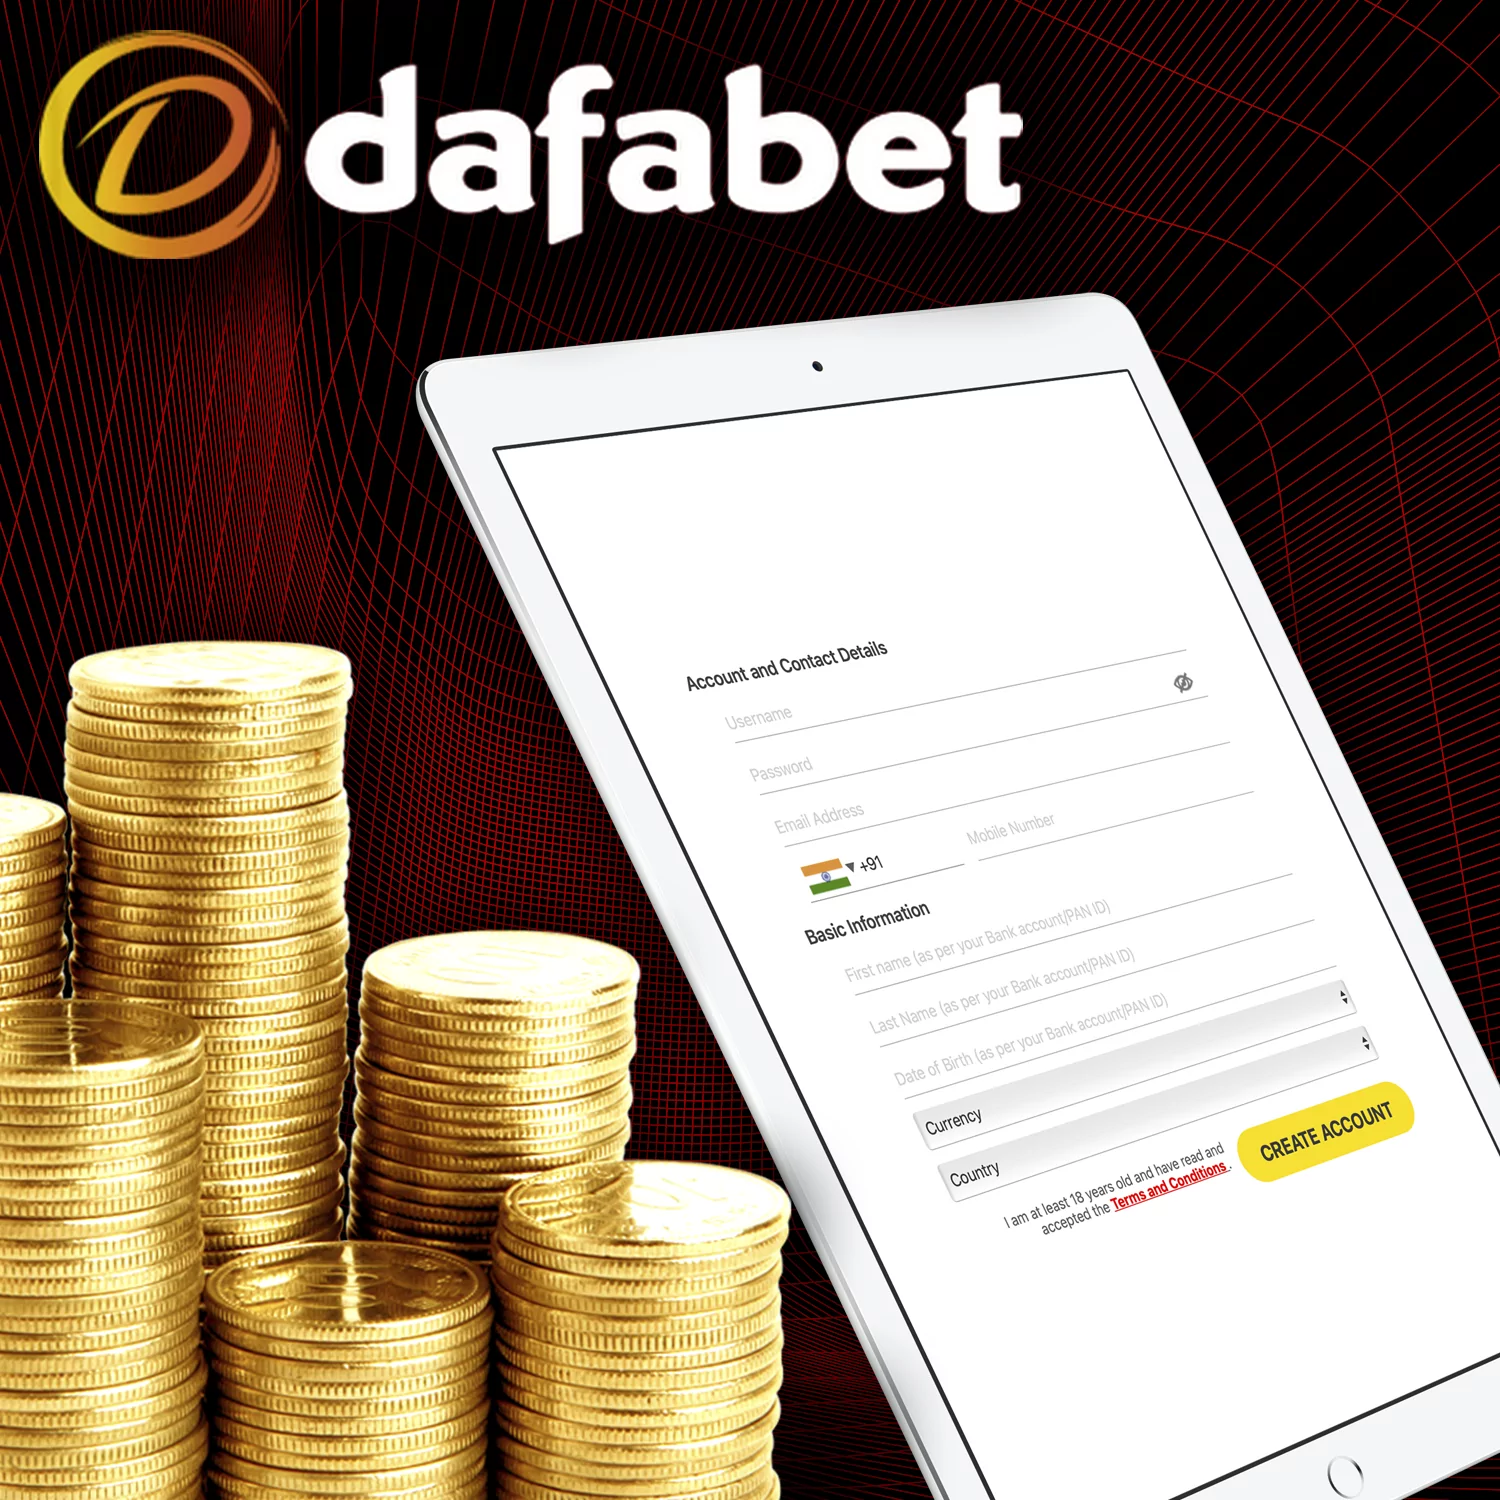 To get the Dafabet welcome bonus you need to register a new account.